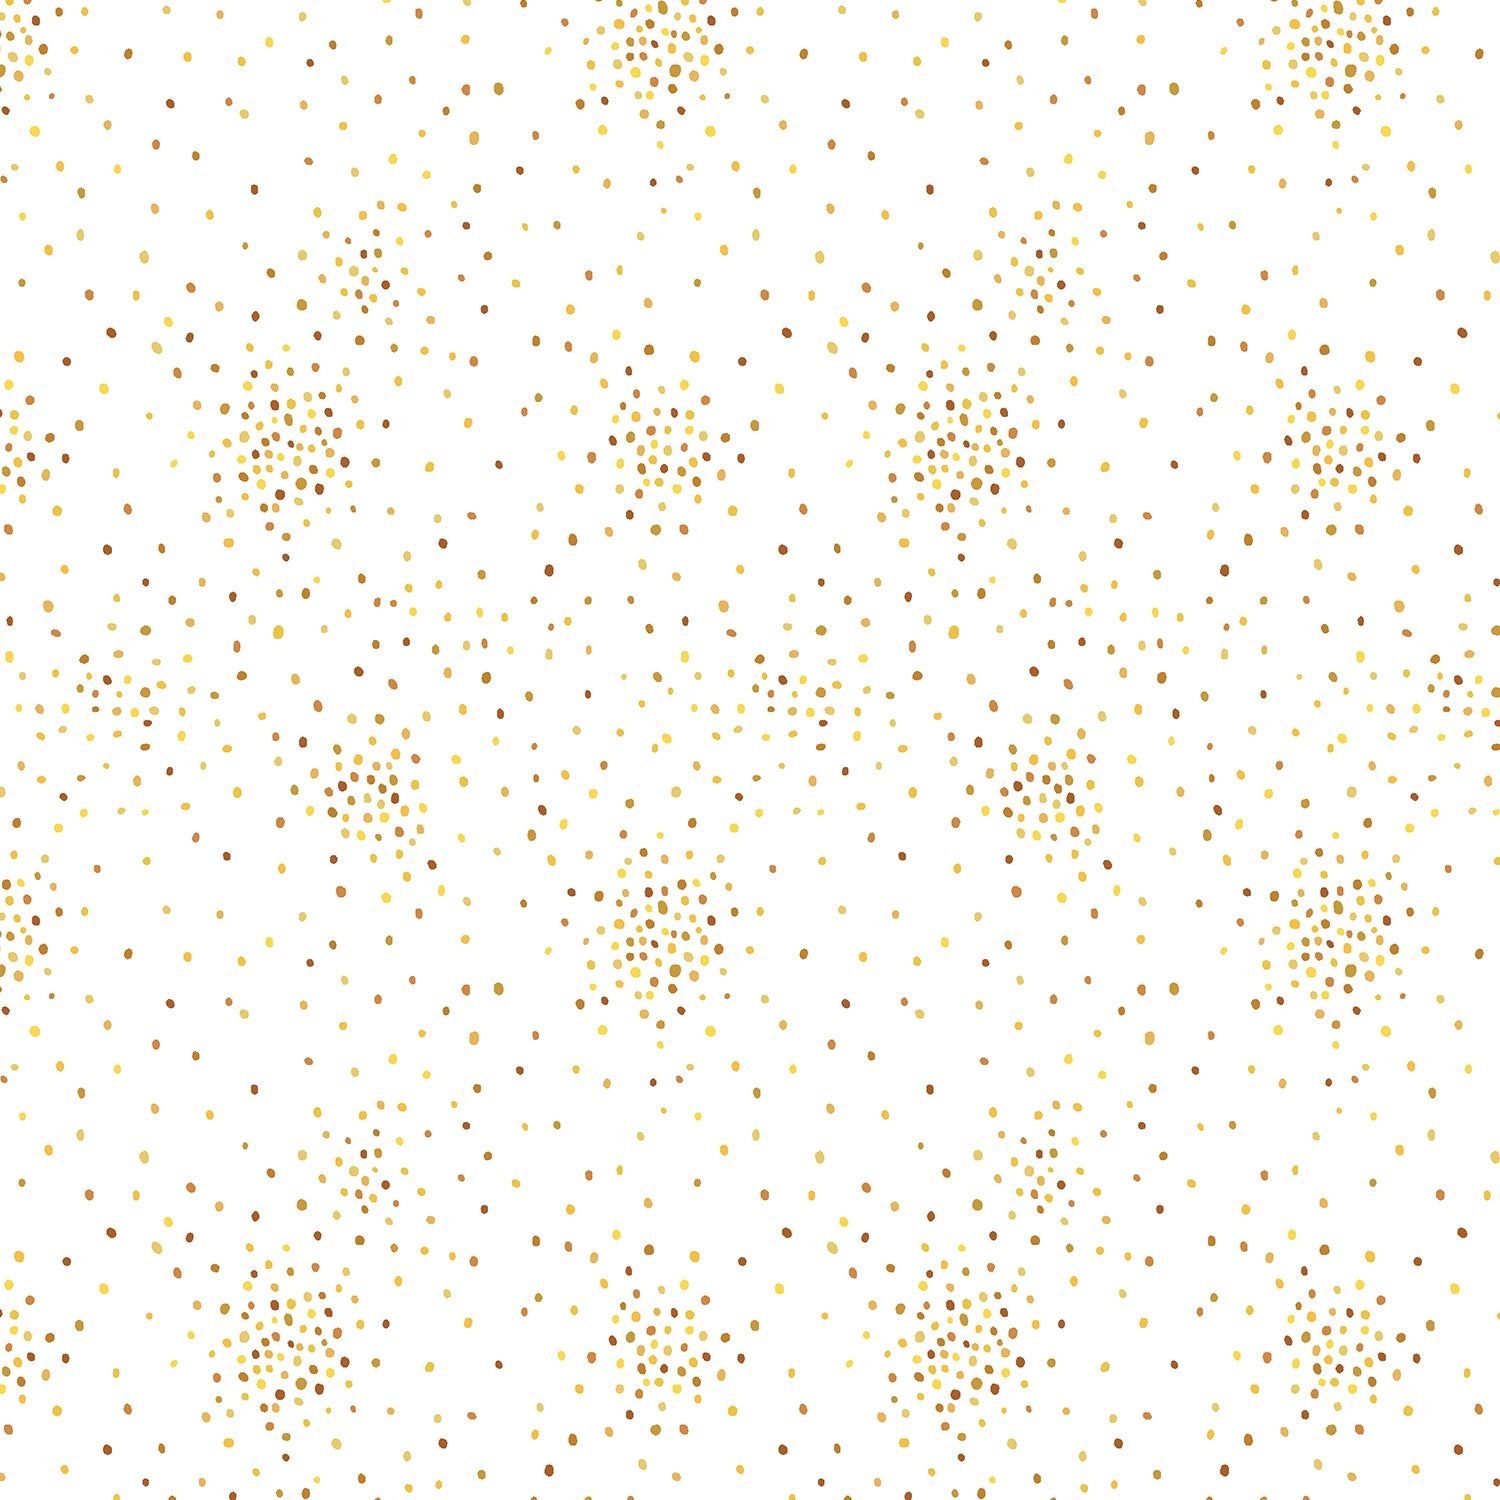 Miniature Minis Dapple Dots Quilt Fabric - Dots in Yellow/White - RJ1705-YW6